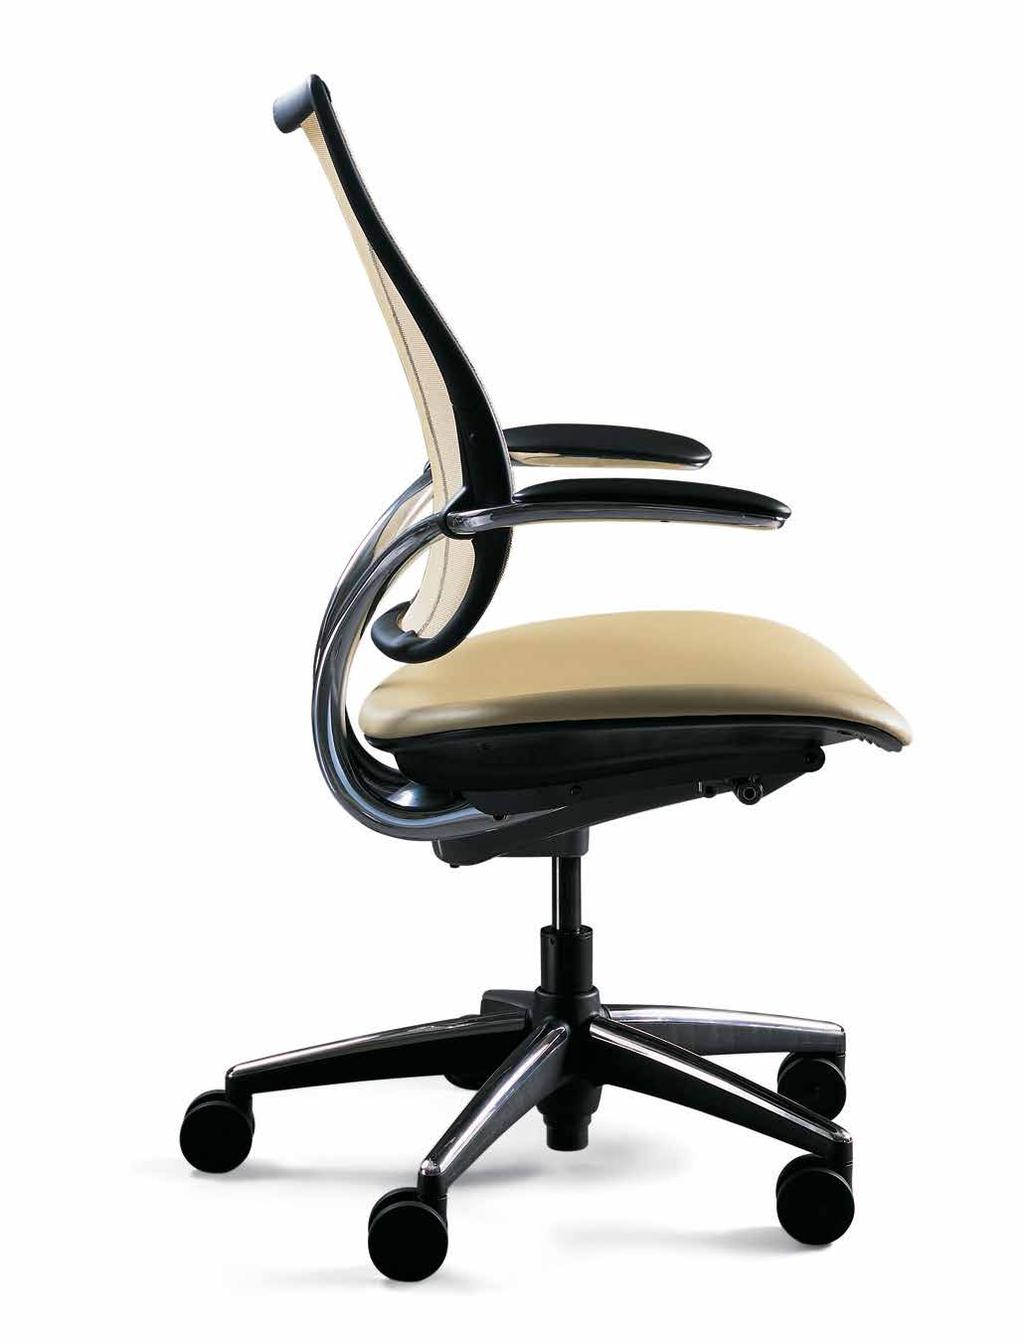 Seating GSA Contract #GS-29F-0001N Task/Conference Chair The first mesh seating solution to achieve full lumbar support without an